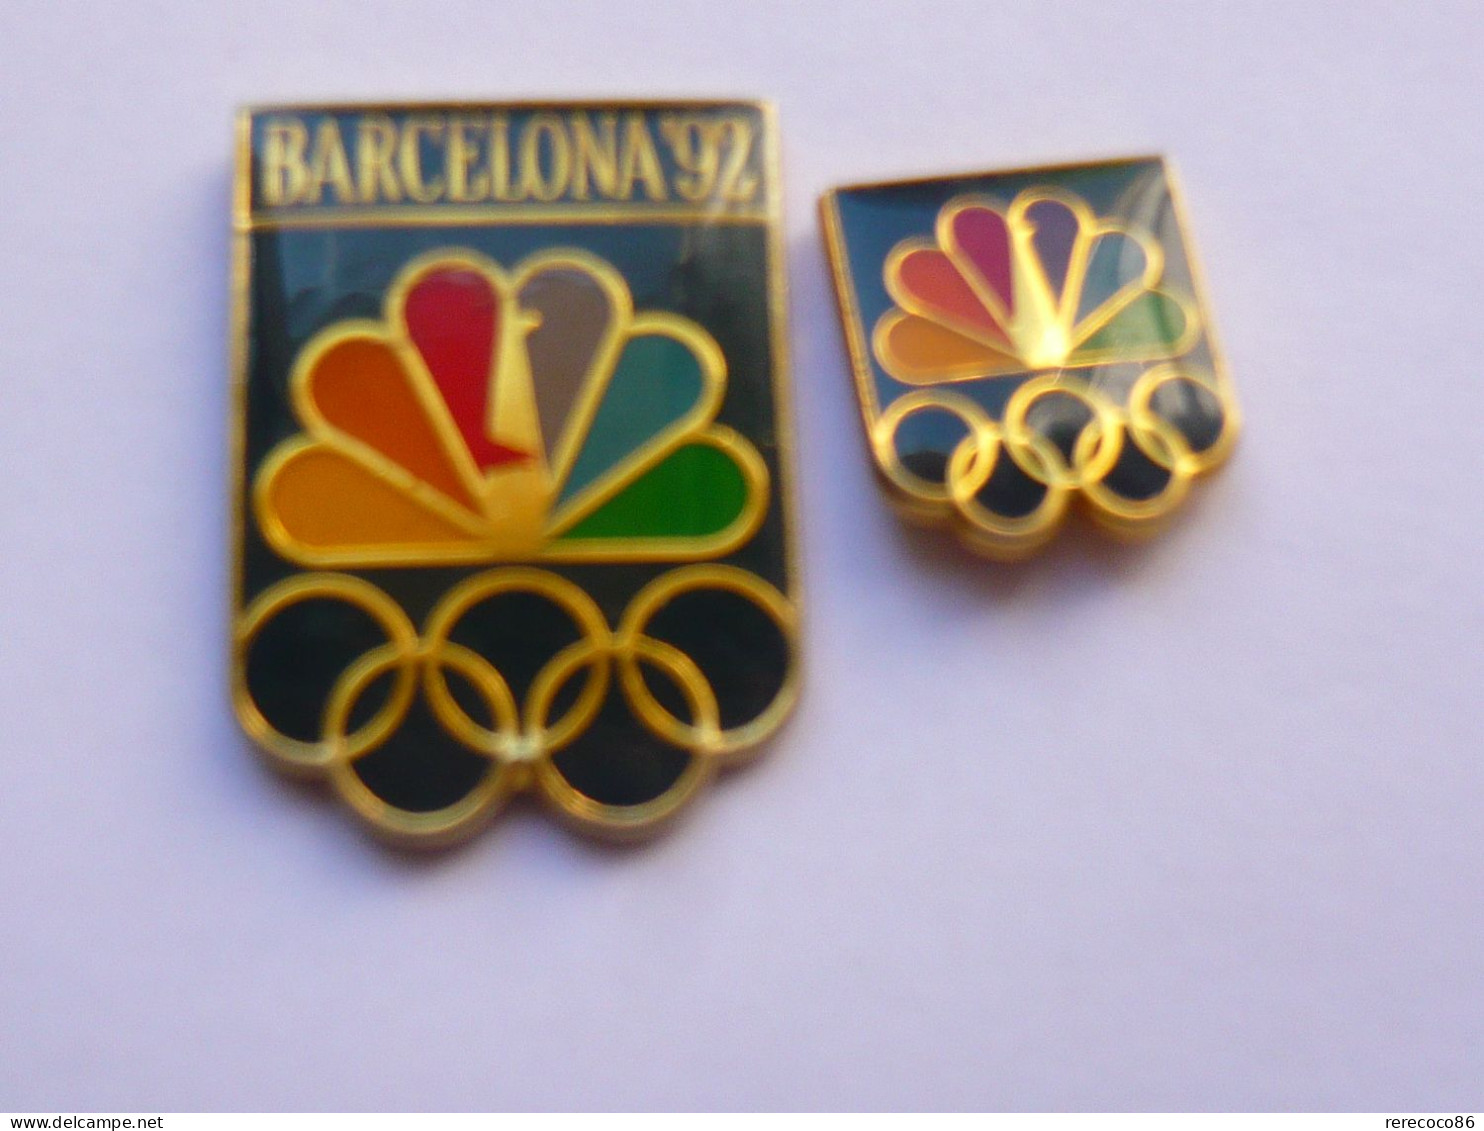 2 Pin S JEUX OLYMPIQUES TELEVISION AMERICAINE BROADCASTING COMPANY Different - Jeux Olympiques